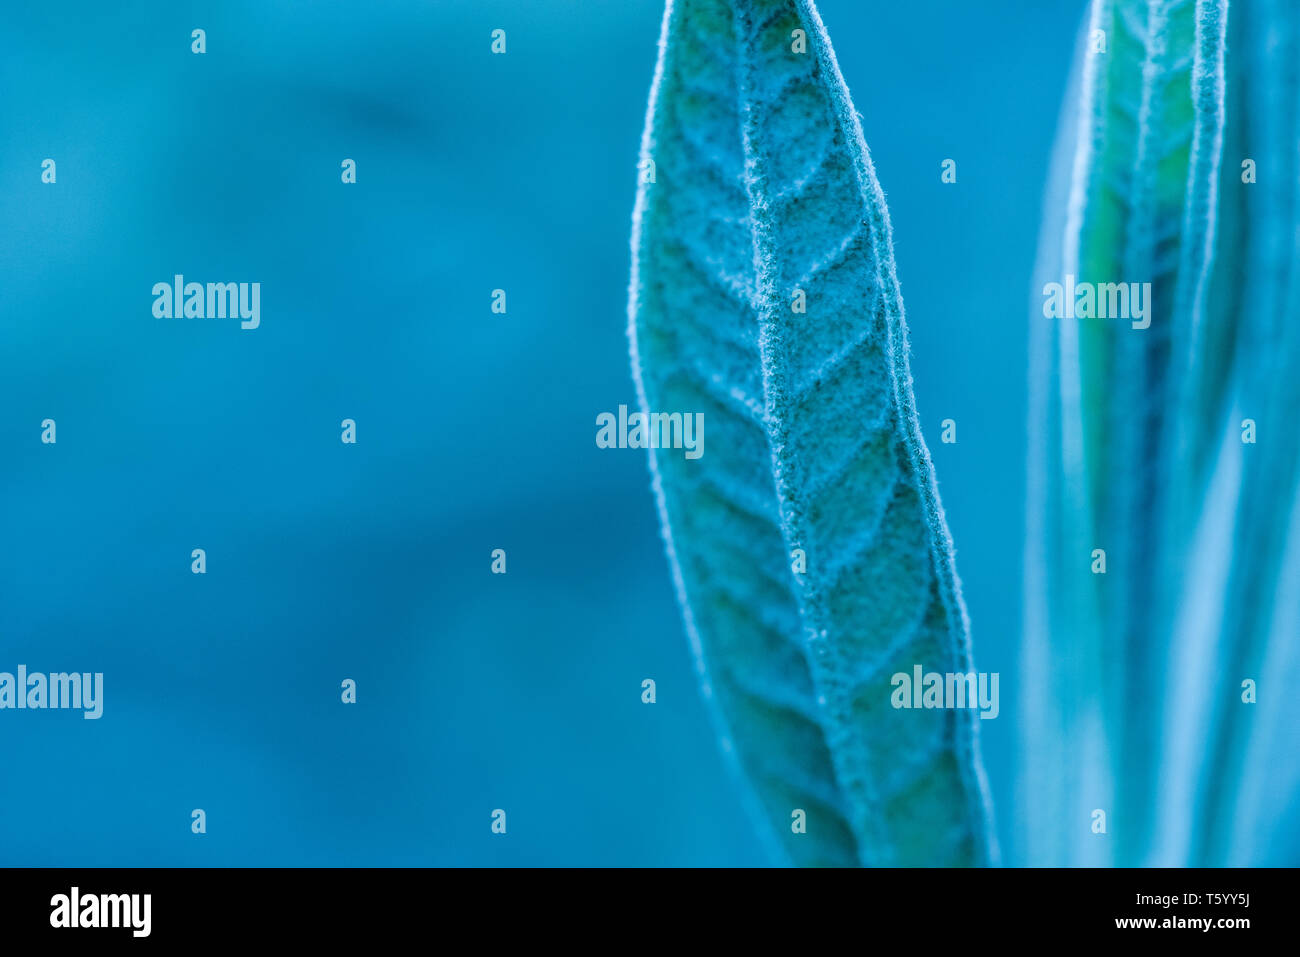 An isolated lavender leaf on the right against a blurred blue background Stock Photo